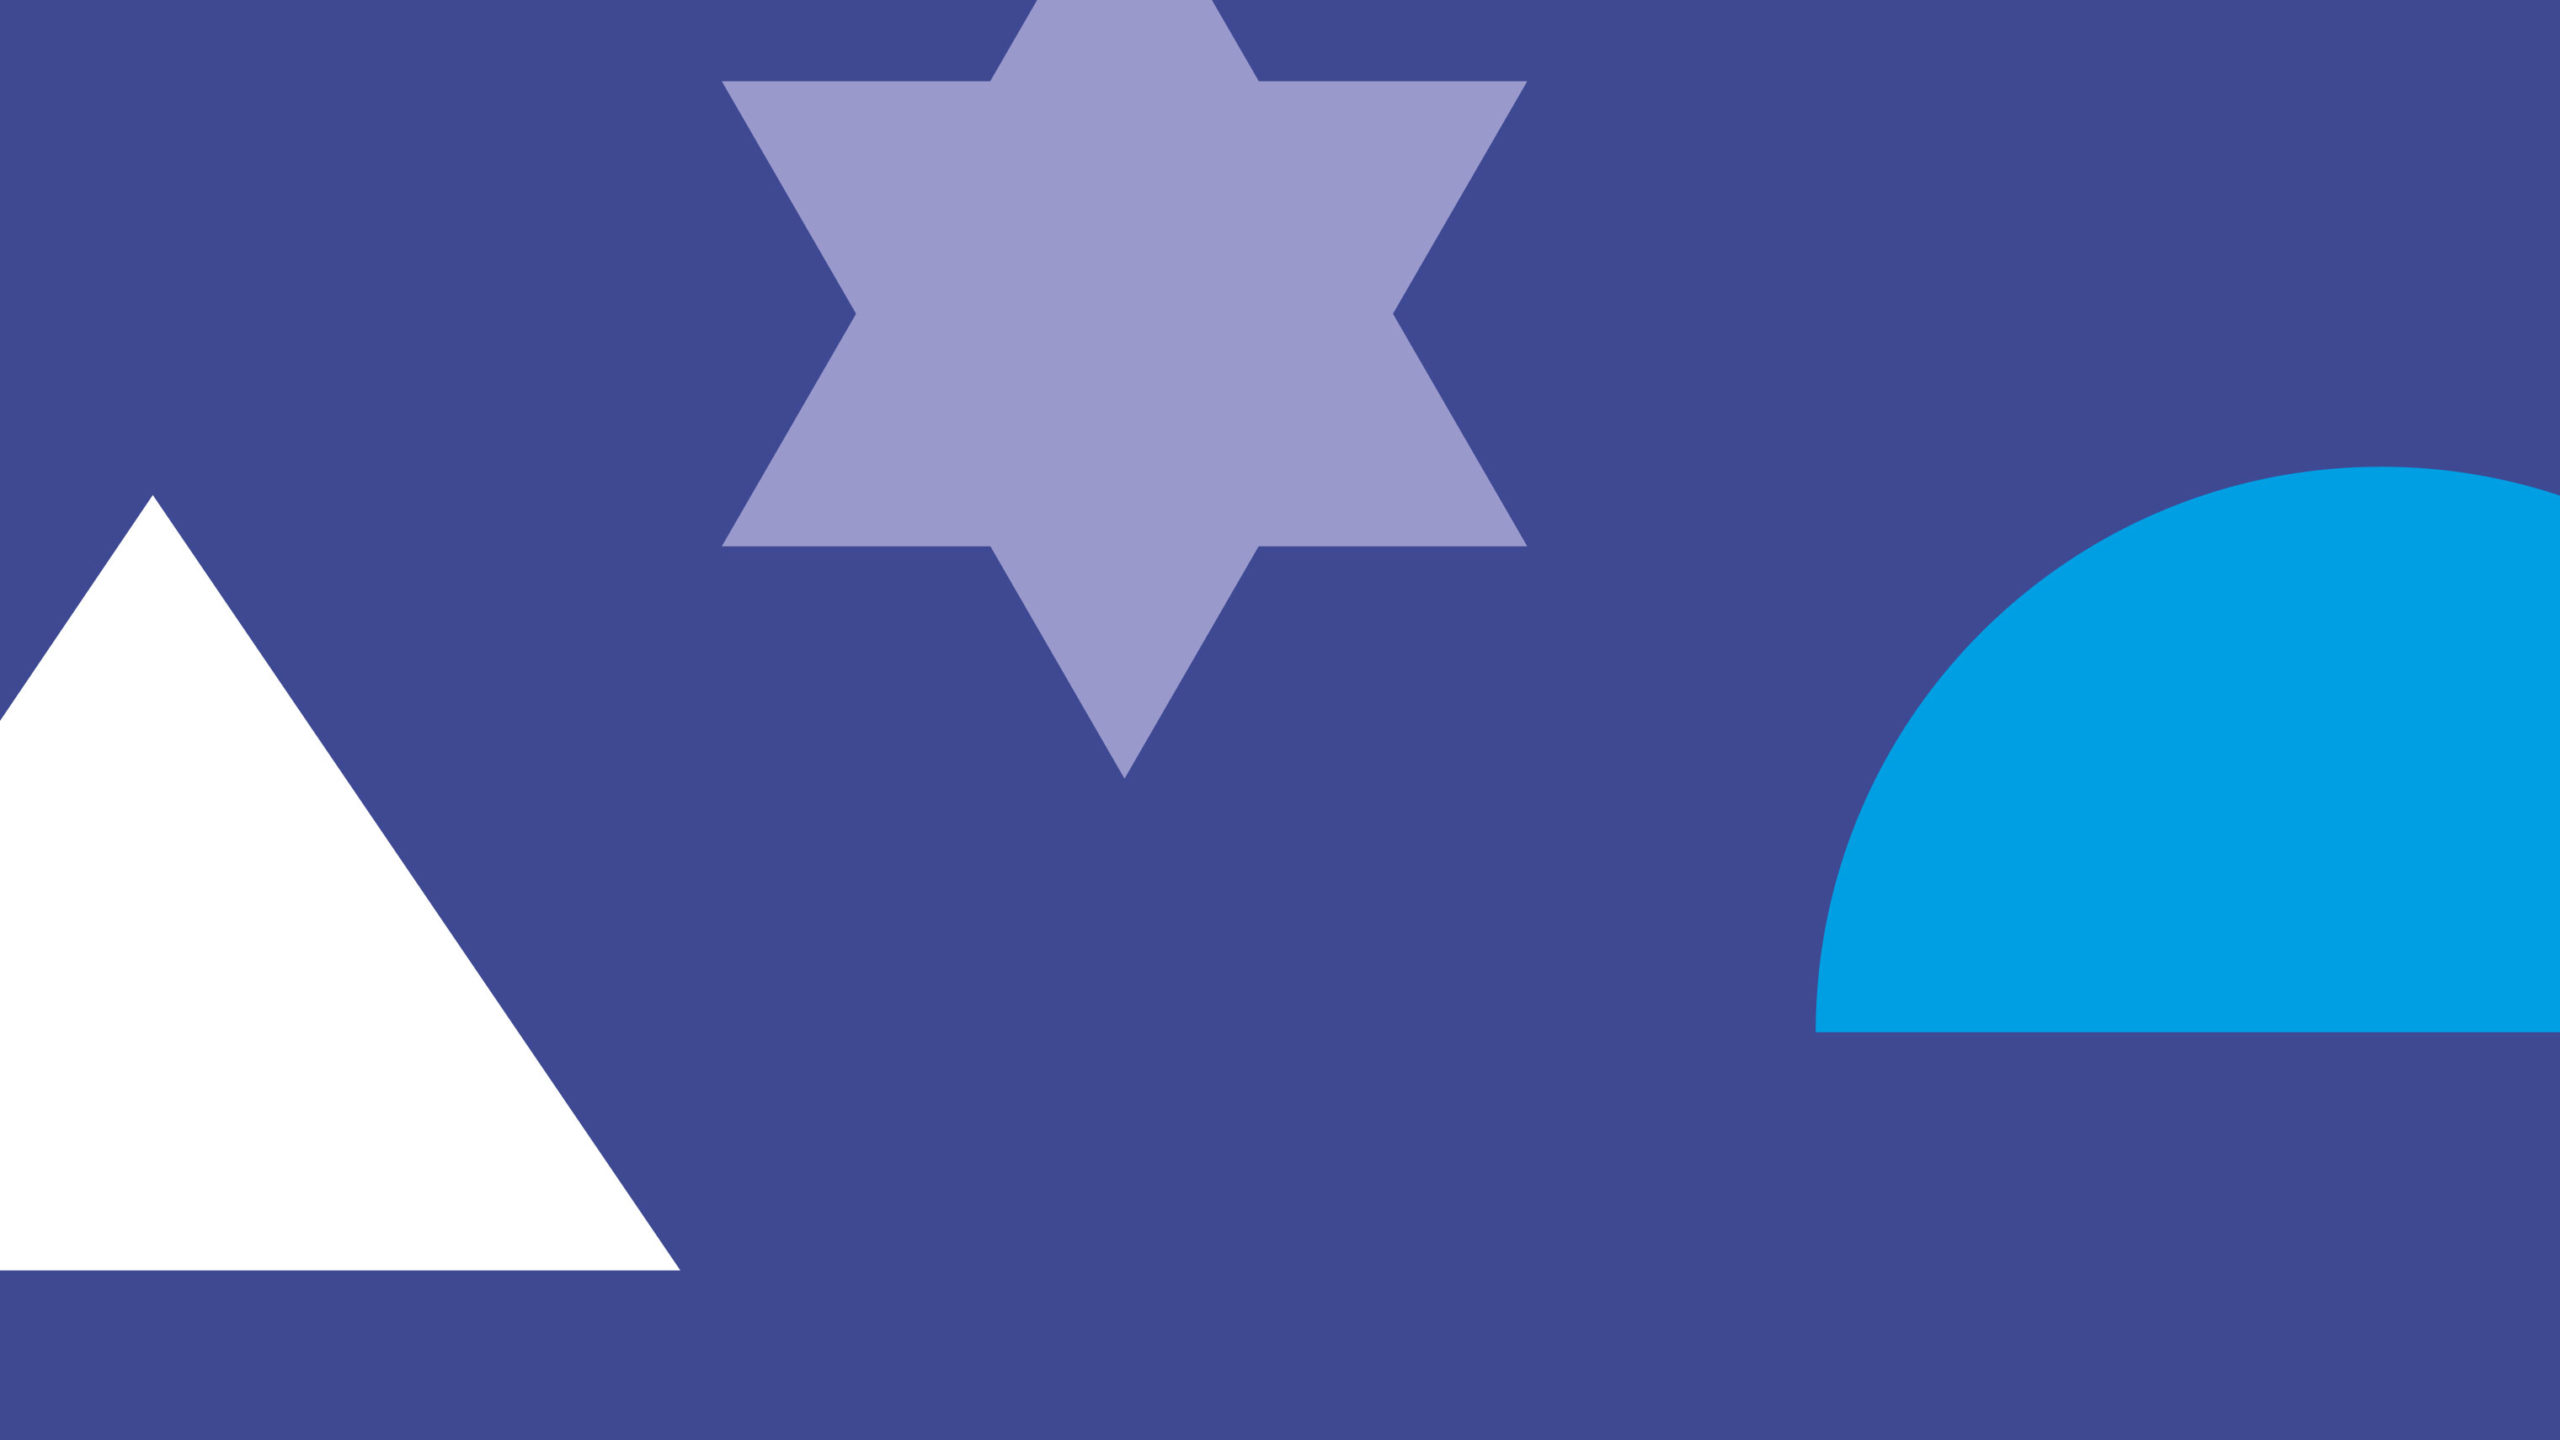 An overview of moulds for the Society for Christian-Jewish Cooperation, designed by Florida Brand Design